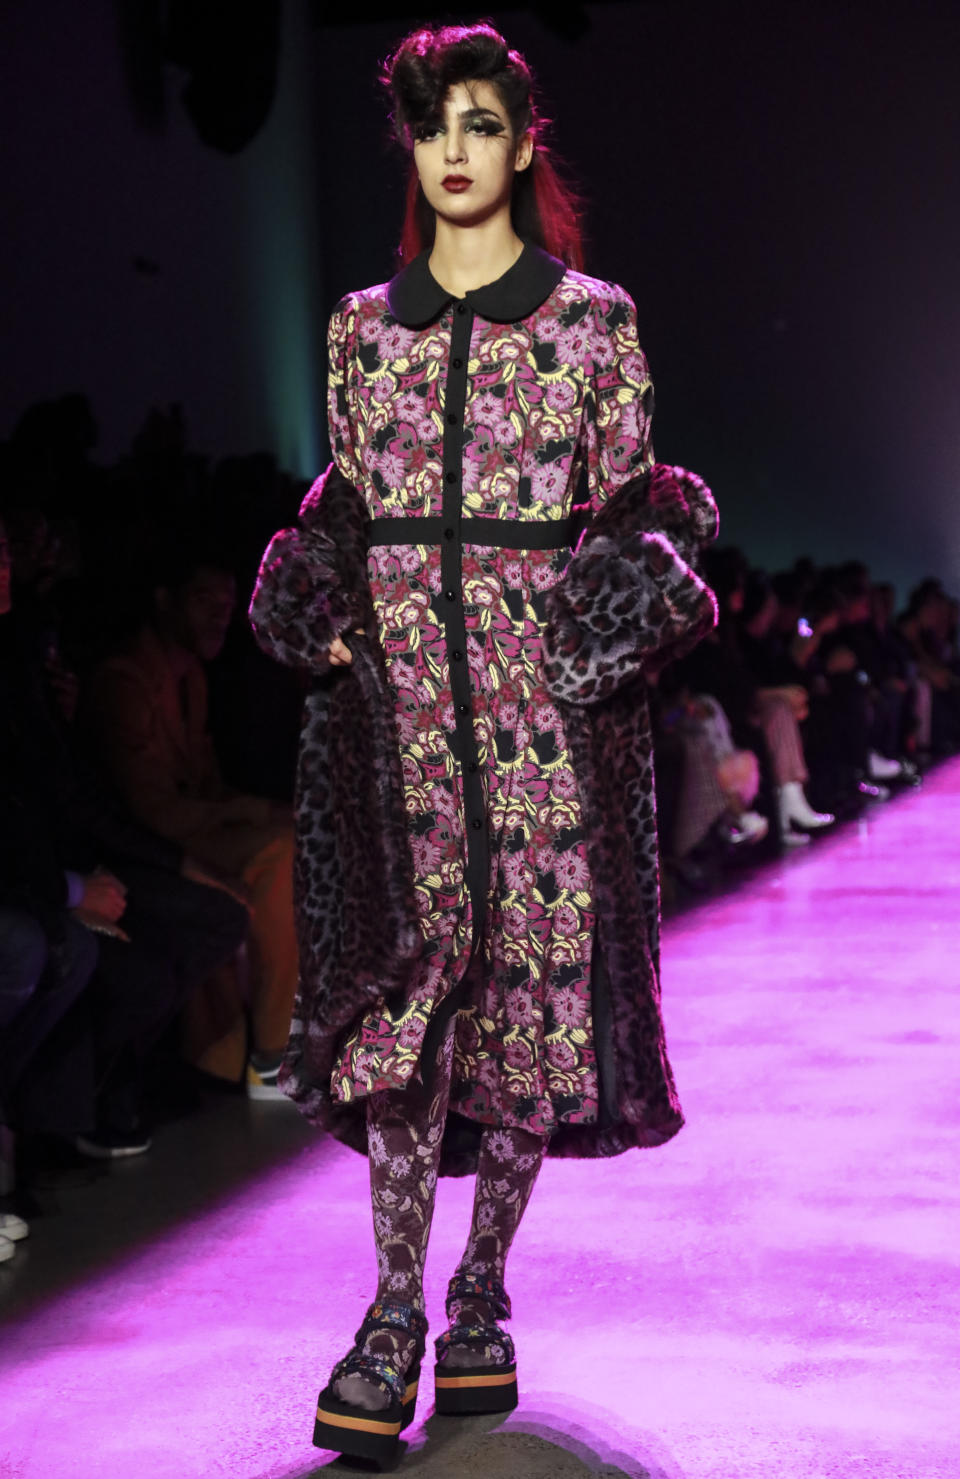 A model walks the runway in a creation by Anna Sui during New York's Fashion Week, Monday Feb. 10, 2020. (AP Photo/Bebeto Matthews)